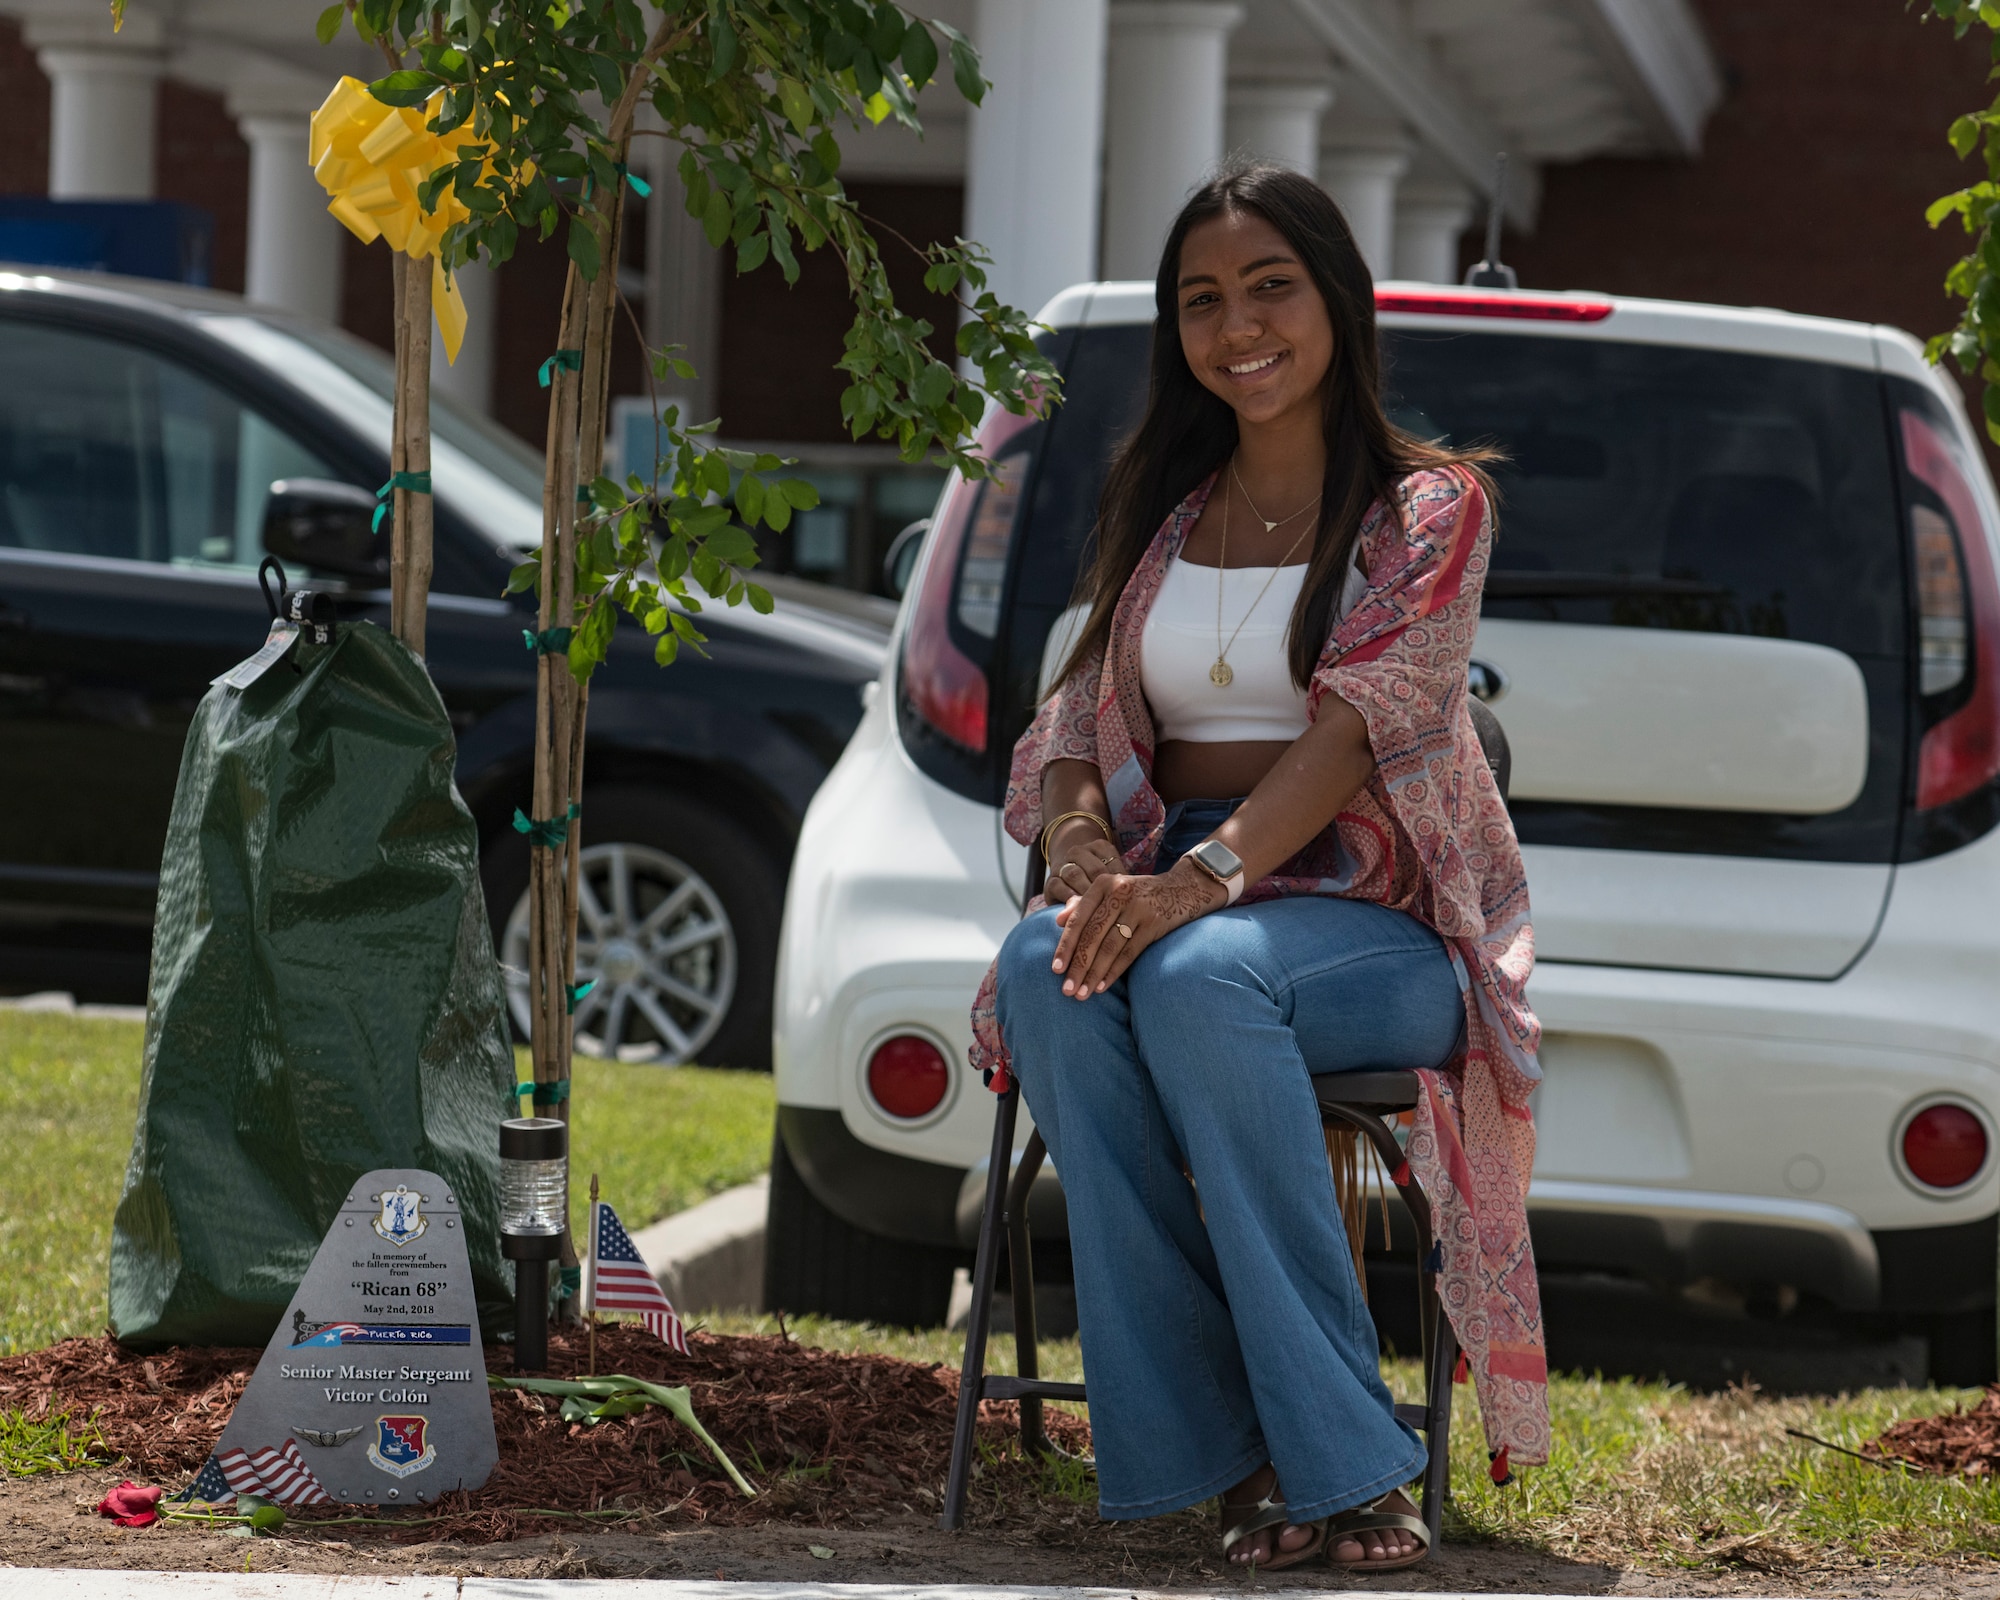 Valeria Colon, daughter of Master Sgt. Victor Colon, poses for a portrait next to a tree planted in her father’s honor after a memorial ceremony May 2, 2019, in Port Wentworth, GA. The event paid homage to the lives of the nine Puerto Rican Air National Guard Airmen who lost their lives when their C-130 Hercules, assigned to the 156th Airlift Wing, crashed May 2, 2018.